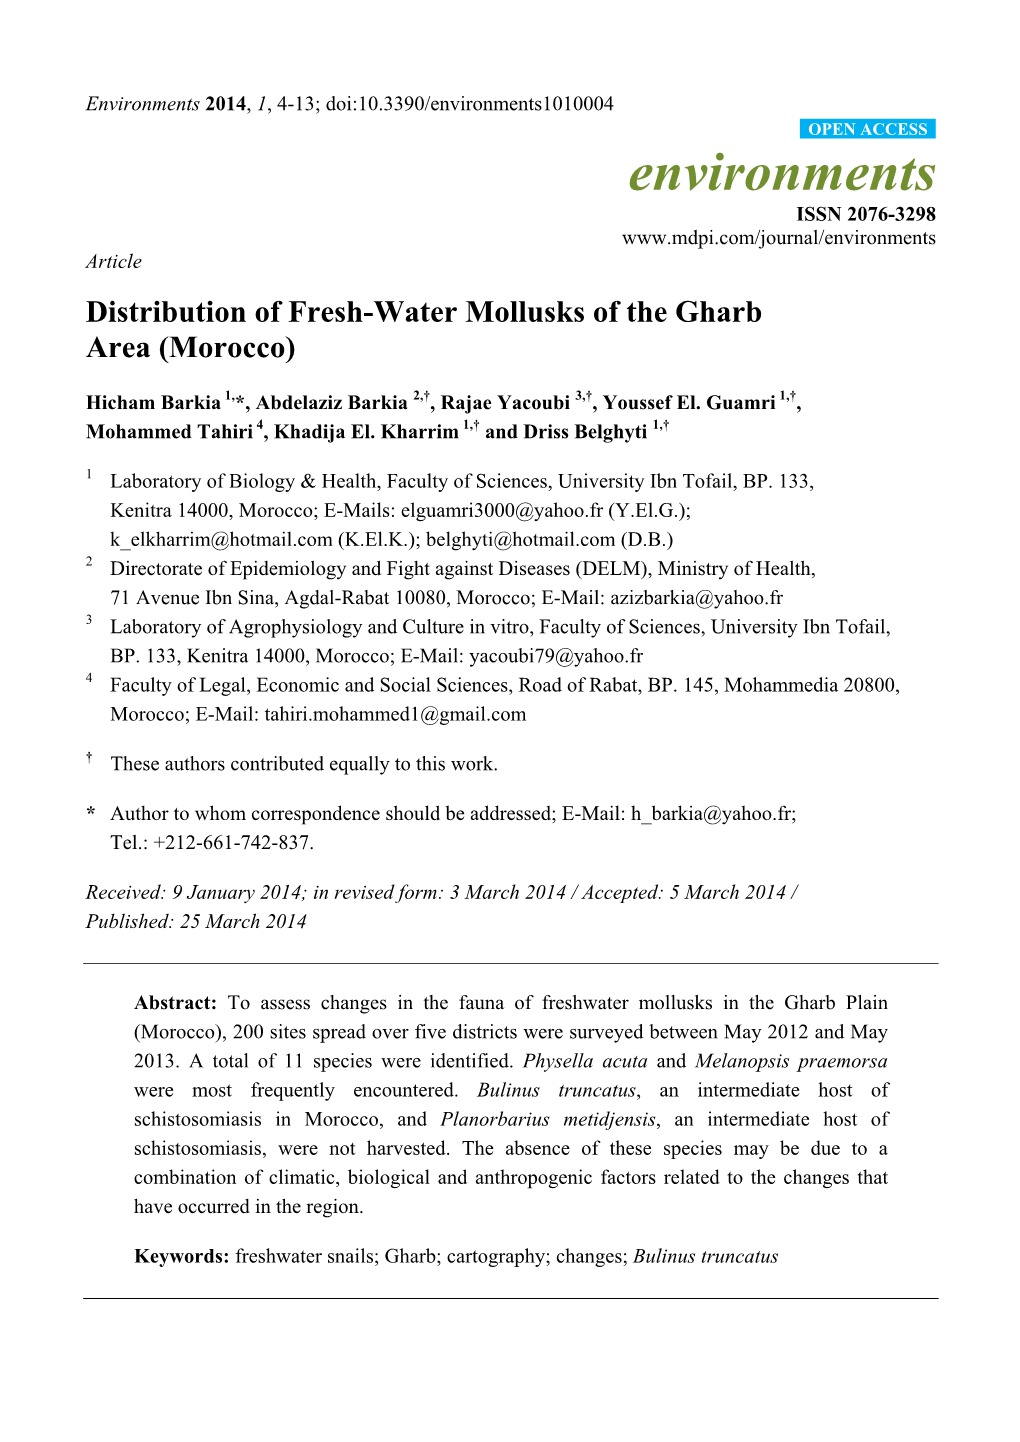 Distribution of Fresh-Water Mollusks of the Gharb Area (Morocco)